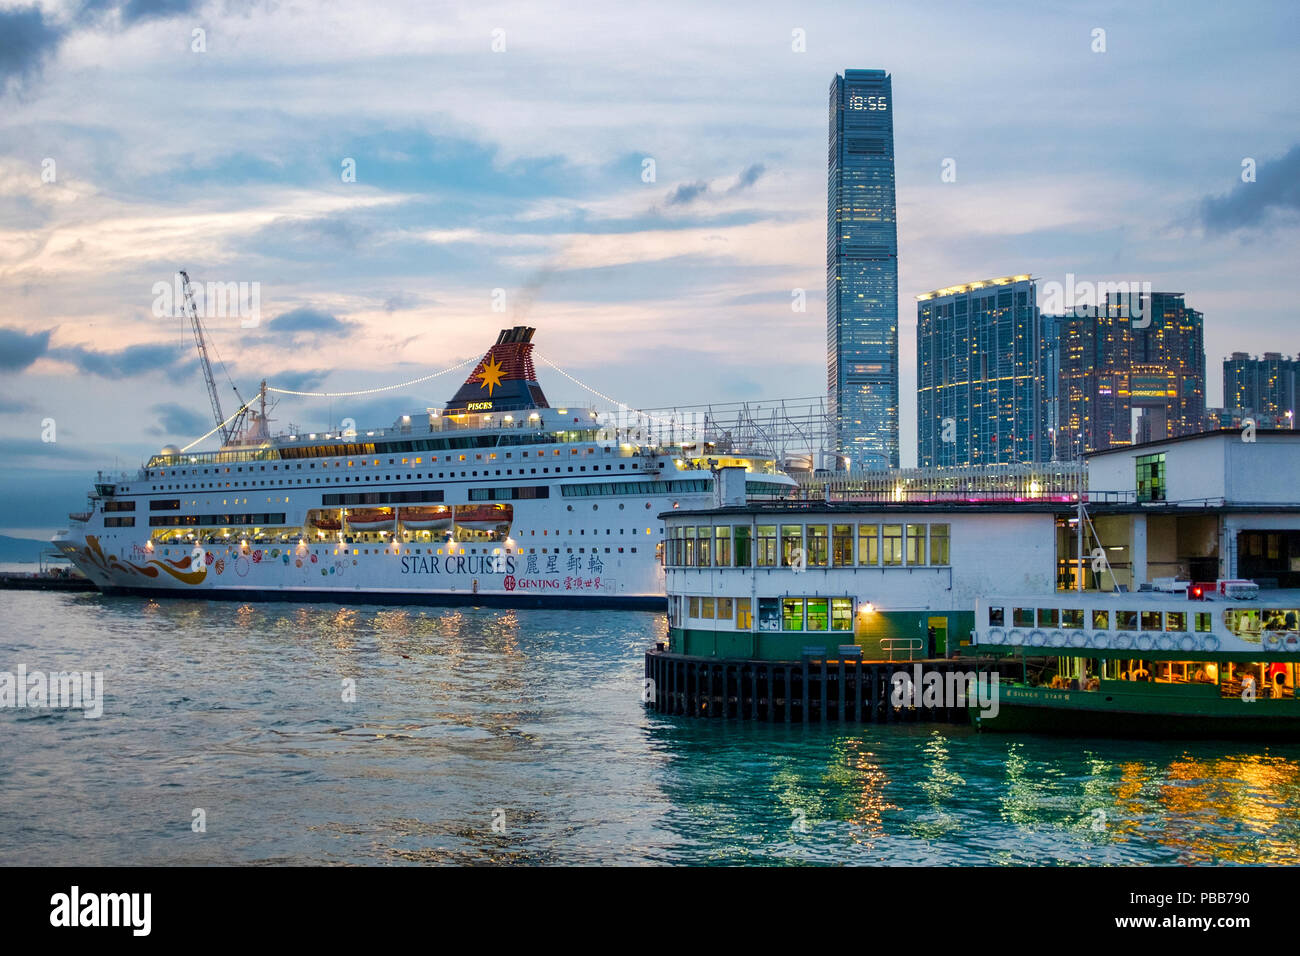 Cruise ship Star Pisces in Victoria Harbour, Hong Kong Stock Photo